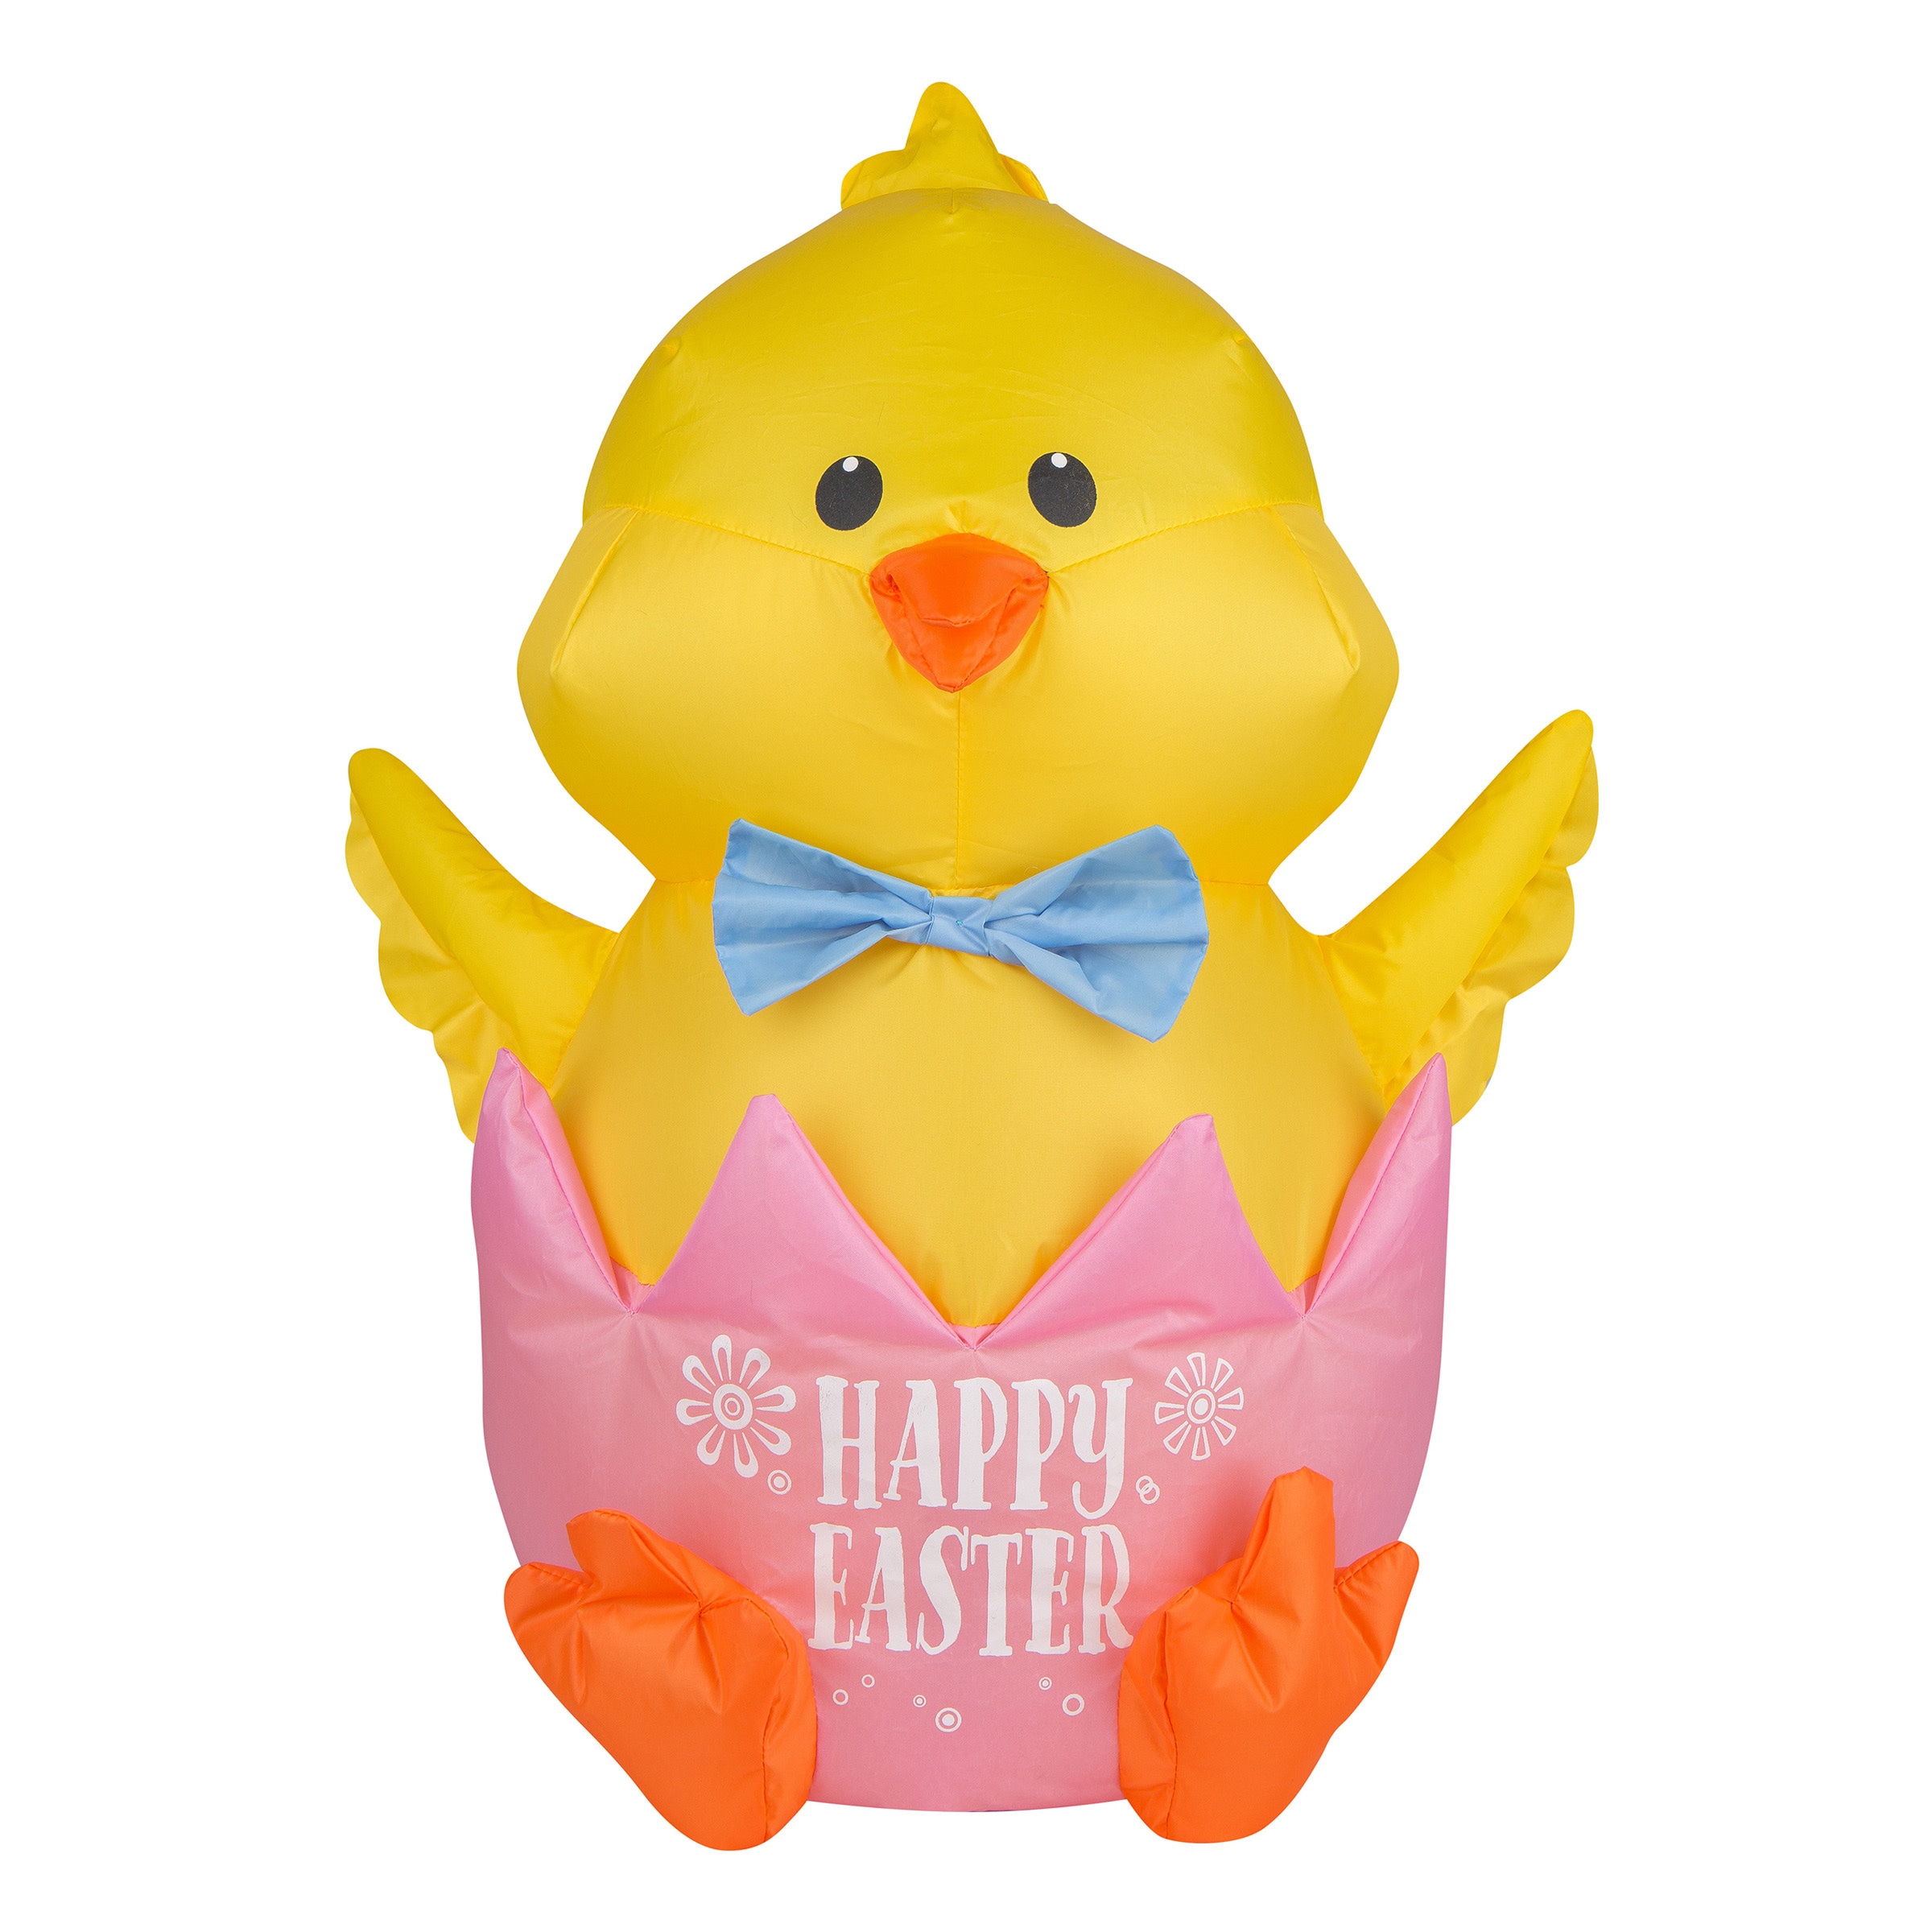 Spring Yellow Chicks Happy Easter Hanging Ornament Card Holiday Decoration 